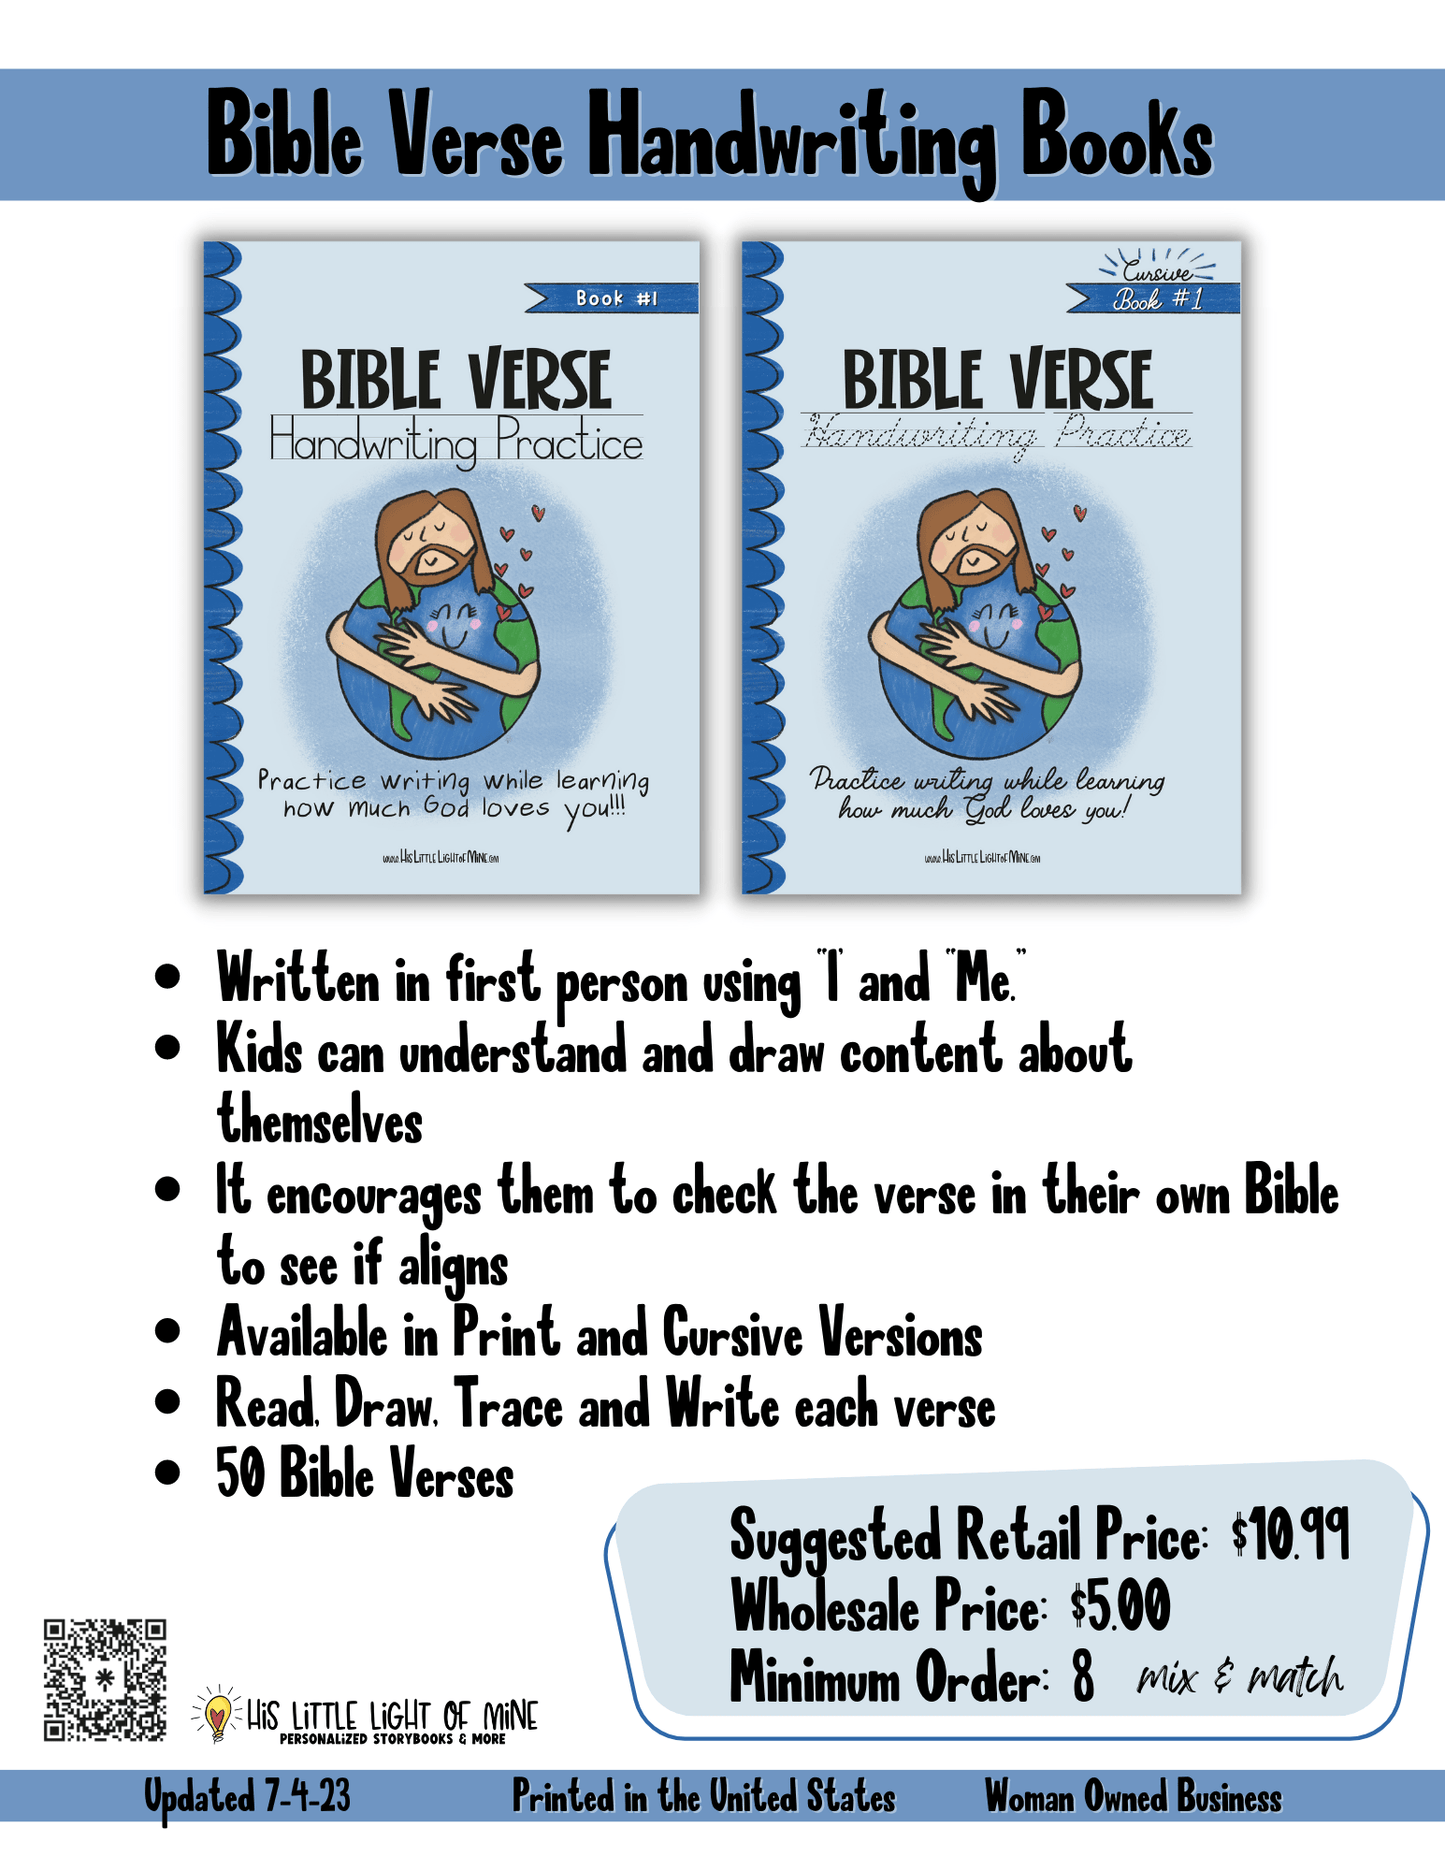 Wholesale ad of the Bible Verse Handwriting Books available in both print and cursive, self-published through Amazon Kindle Direct Publishing